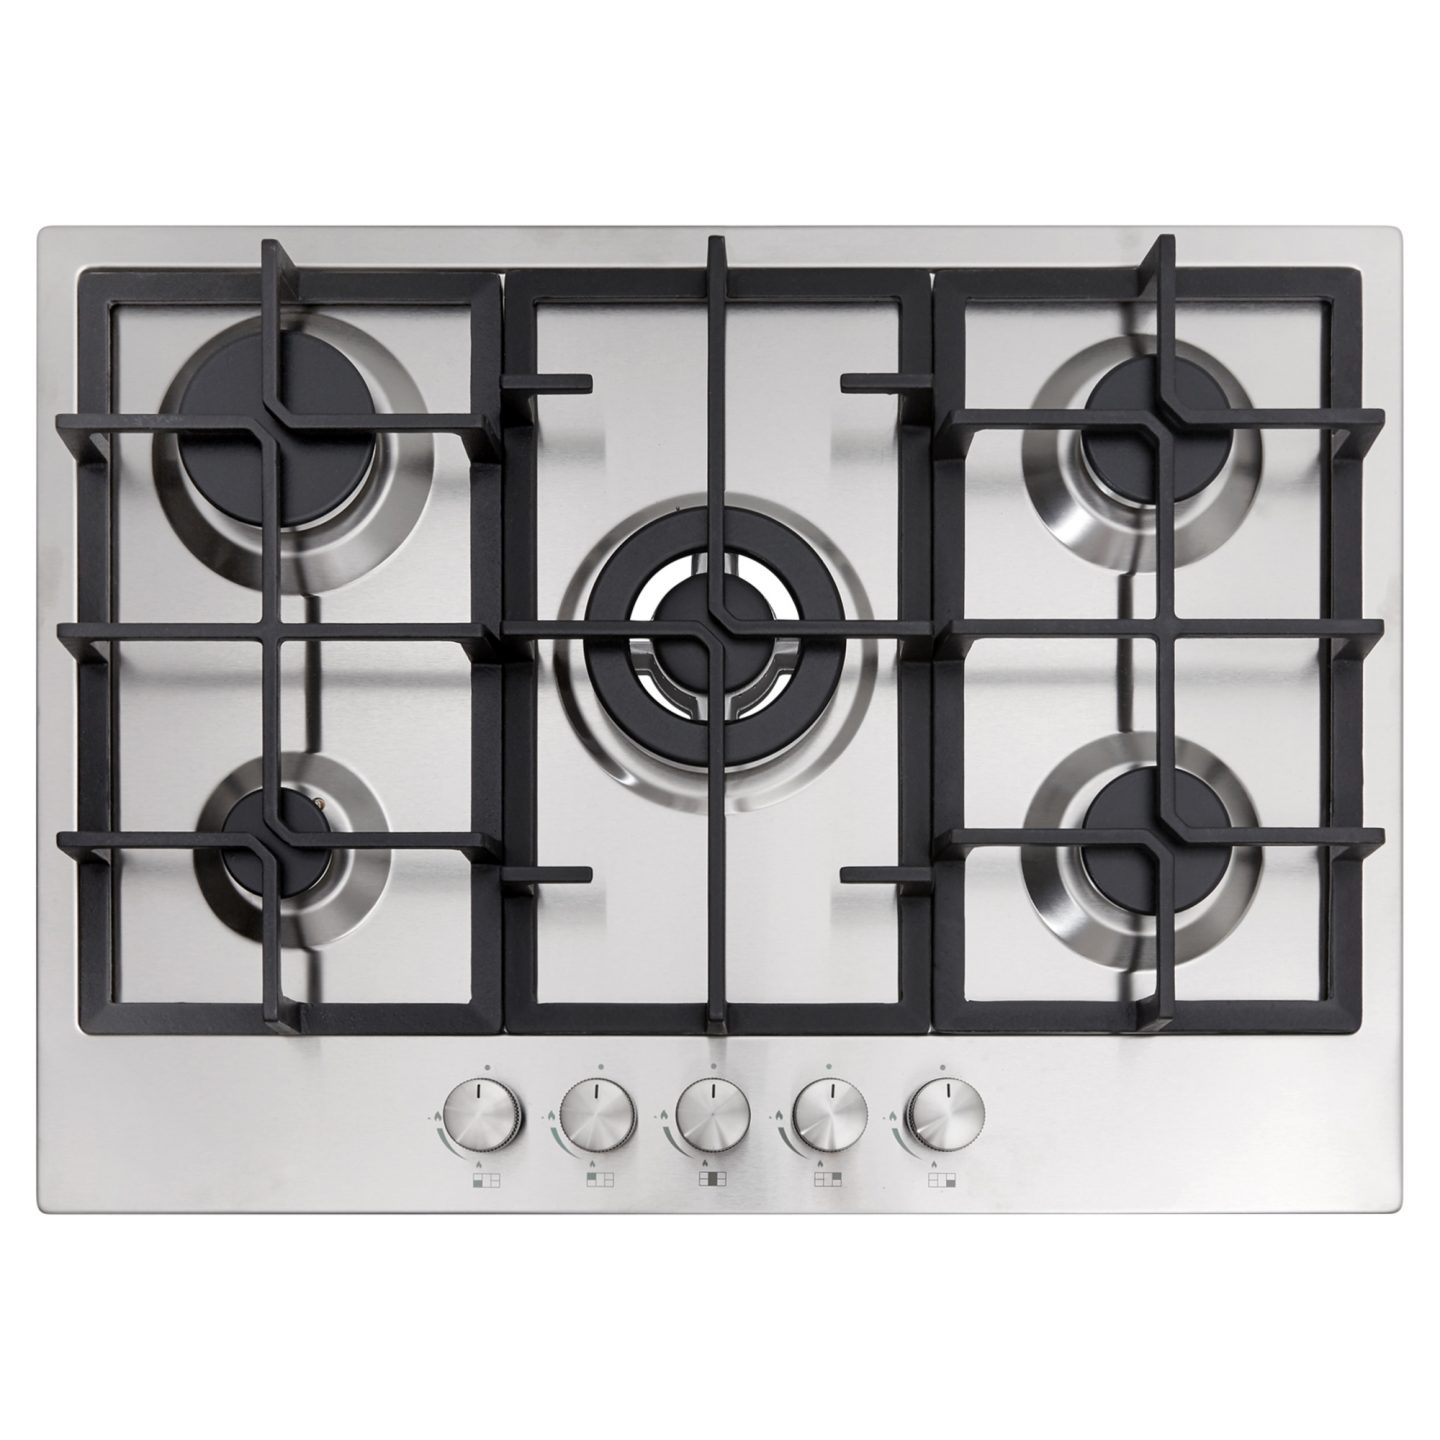 Willow WGH70SSU 70cm Built in 5 Burner Stainless Steel Hob with wok Burner LPG Convertible Easy Clean 2 Years Warranty Cast Iron Pan Supports Automatic Ignition 